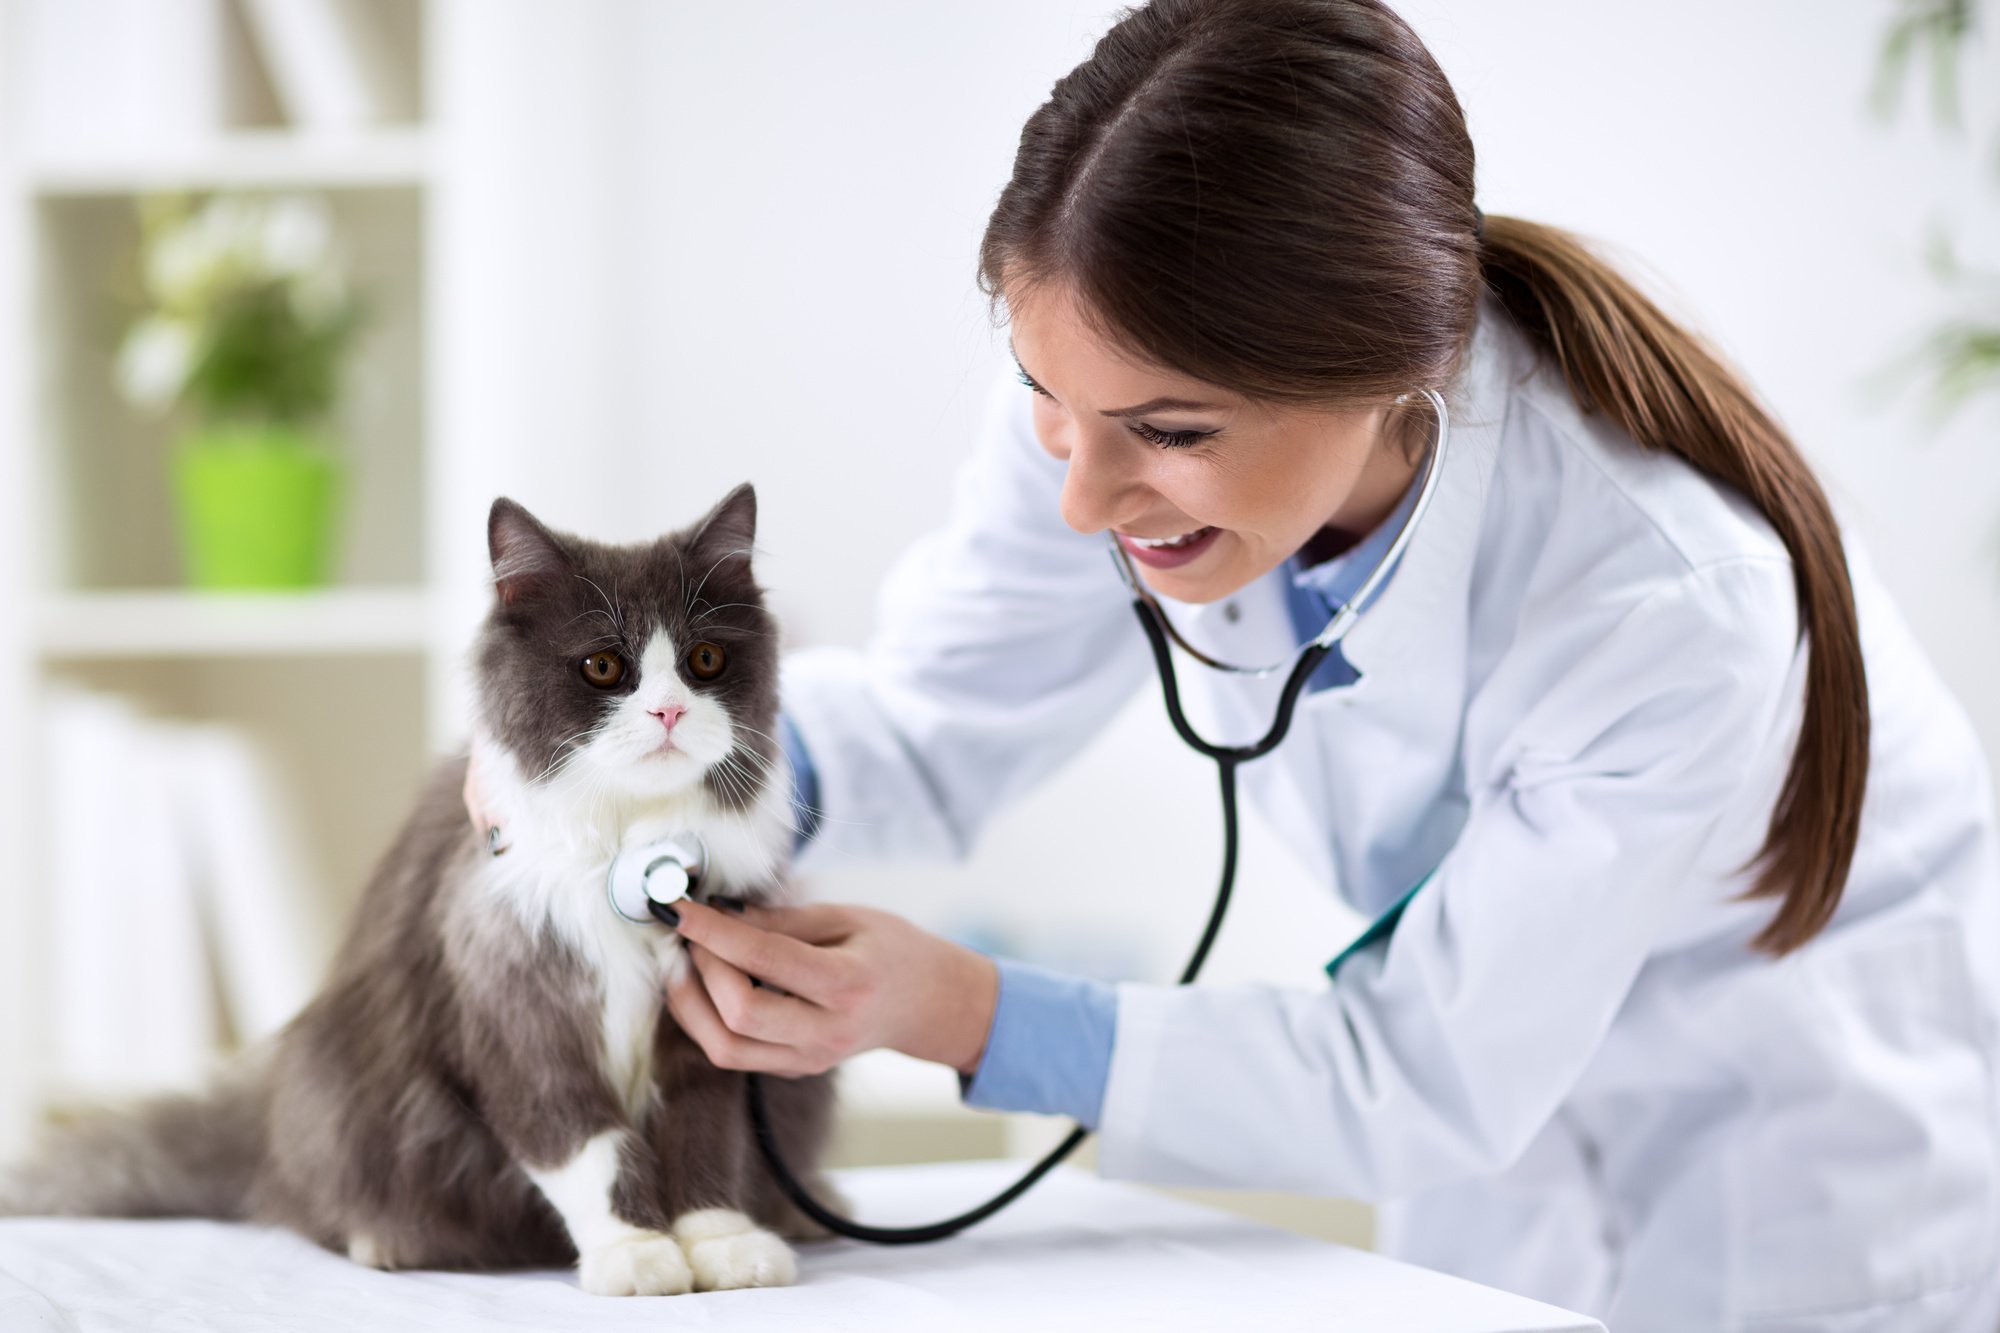 How to Find Location for an Animal Hospital